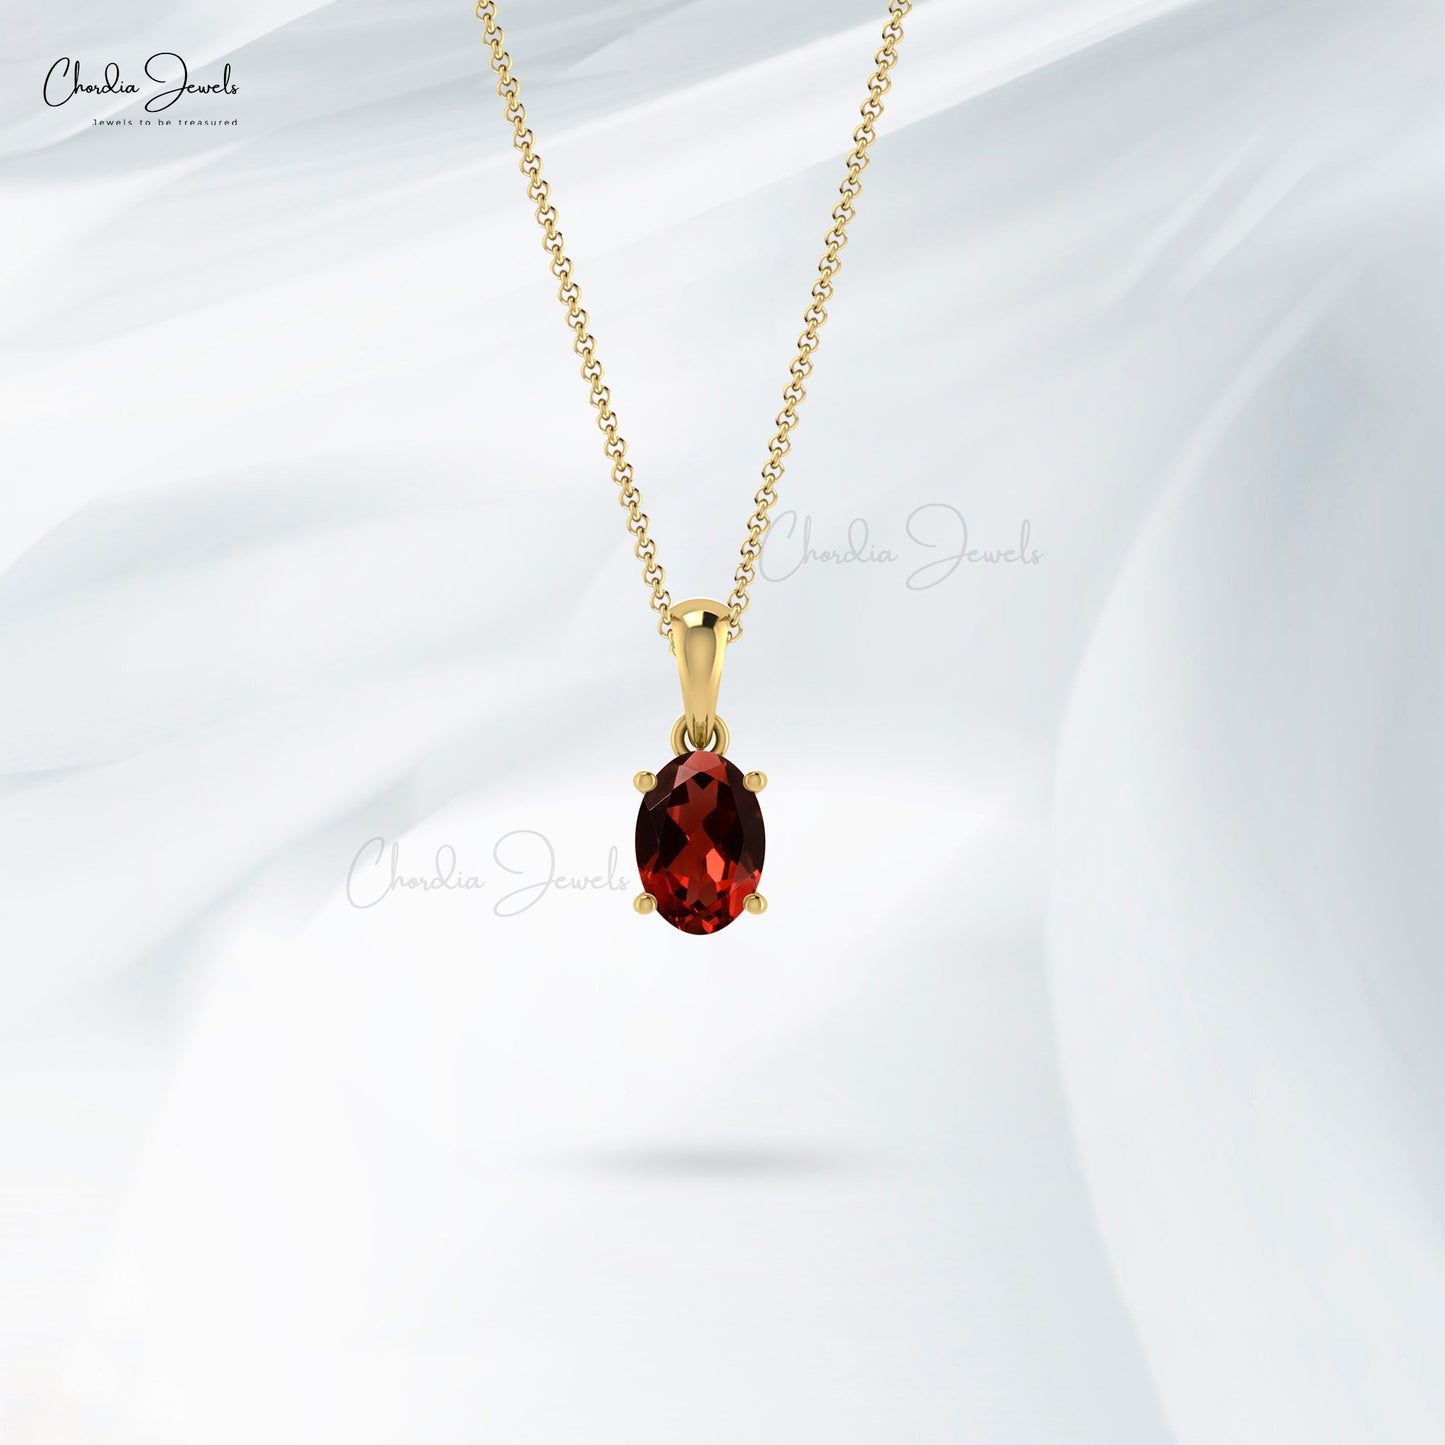 Load image into Gallery viewer, Genuine Natural Oval Garnet in 14k Solid Gold Gemstone Pendant
